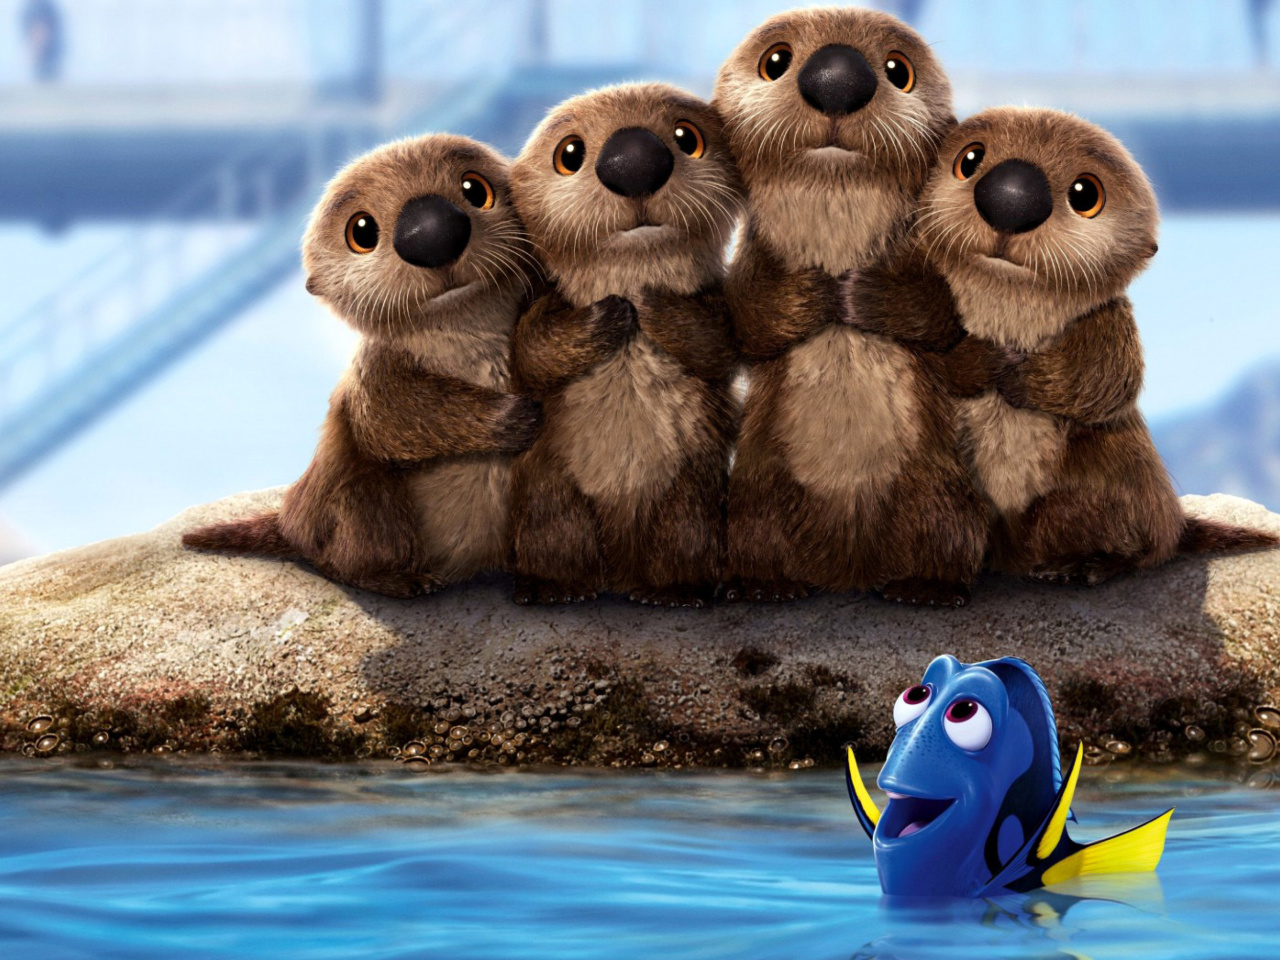 Finding Dory 3D Film with Beavers wallpaper 1280x960